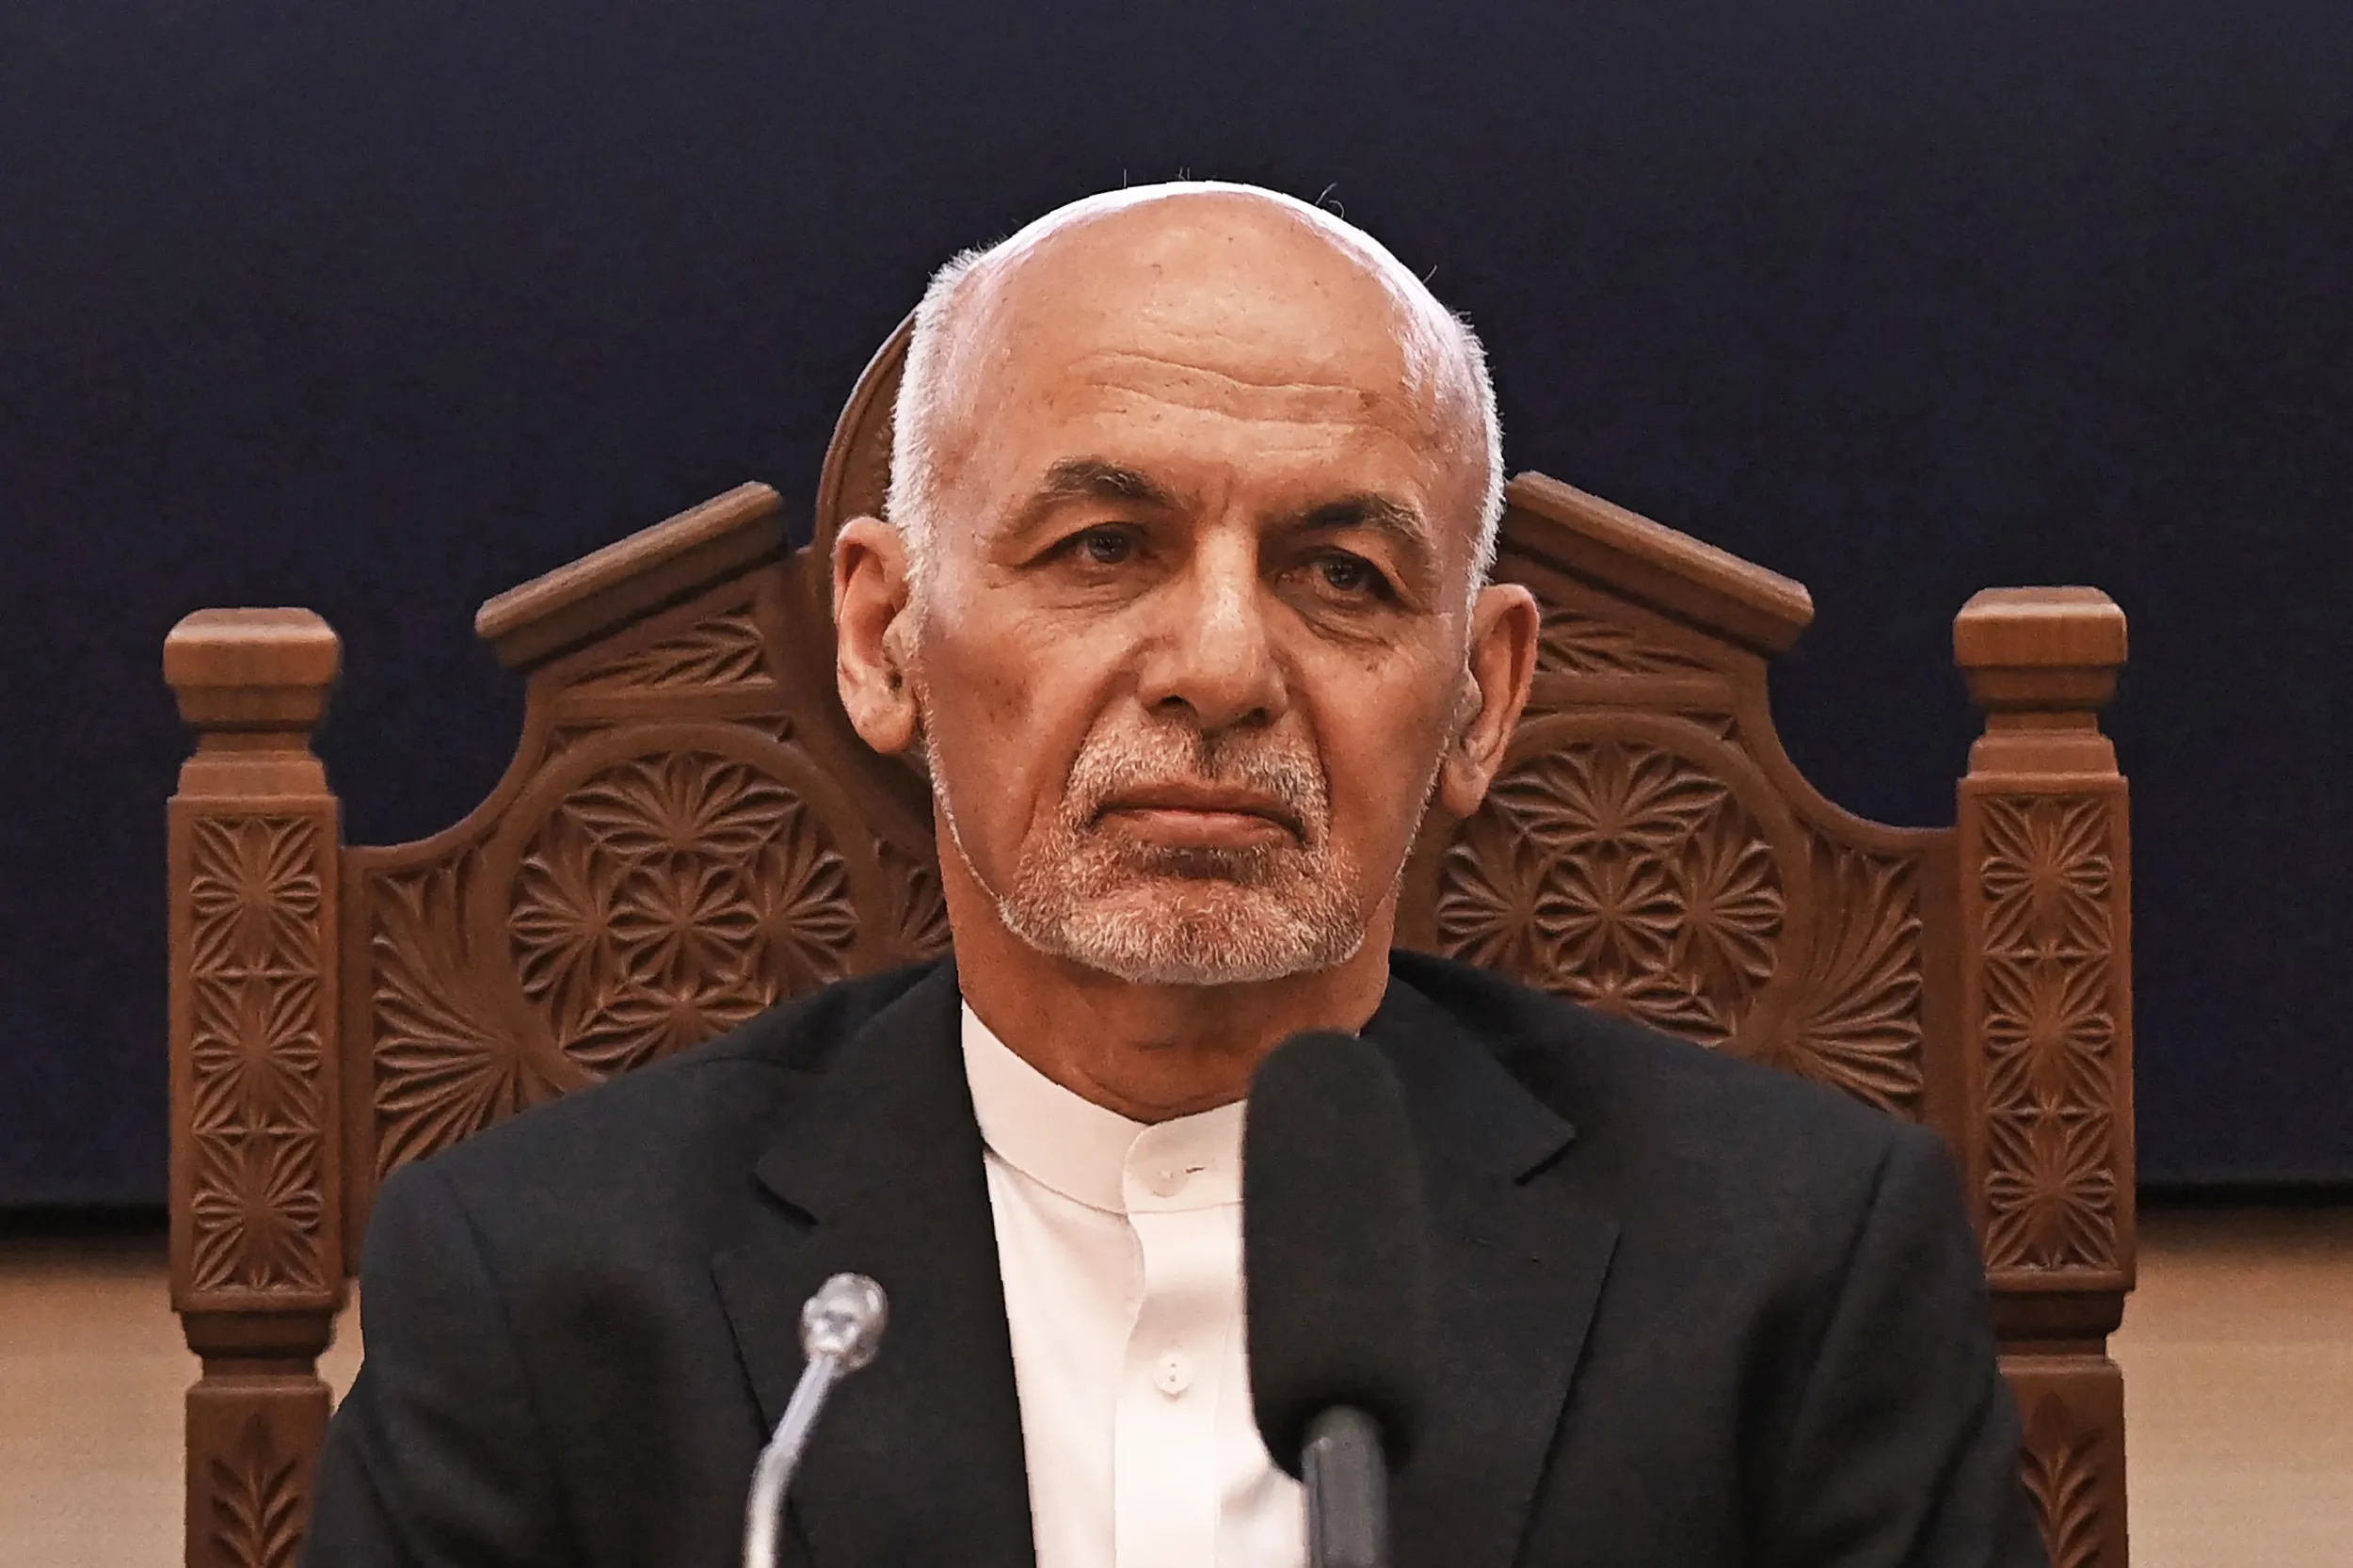 From Afghan nation-builder to life in 'exile': Ashraf Ghani flees country in defeat